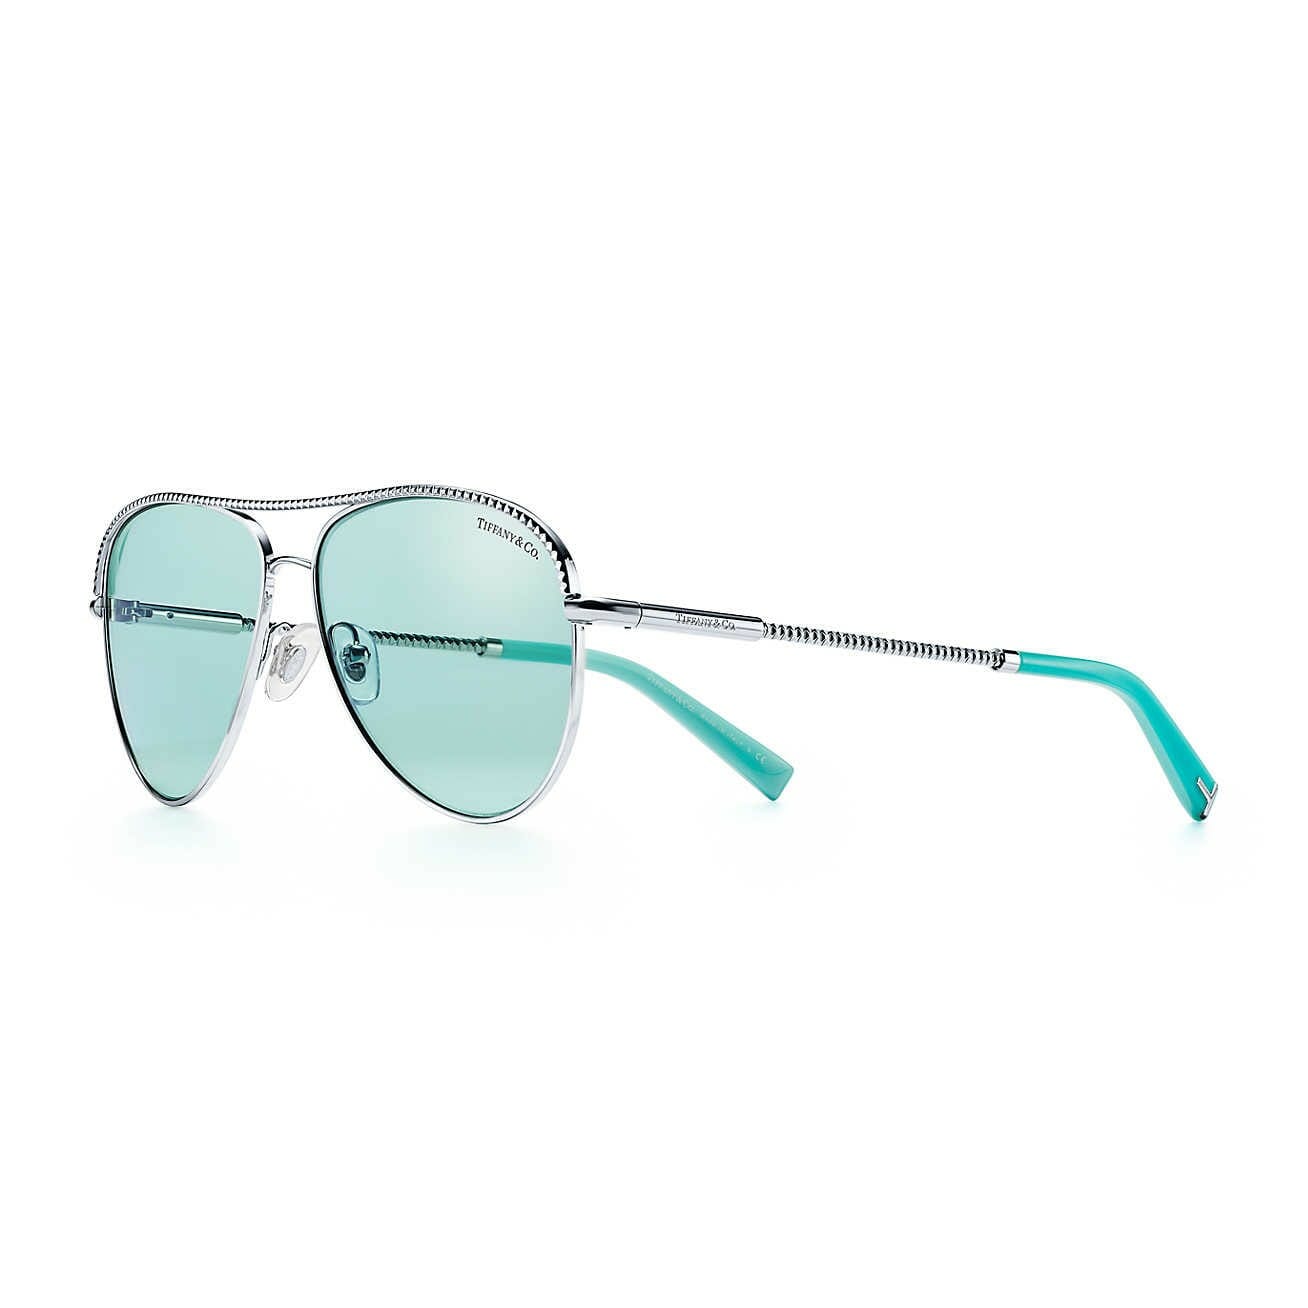 Mothers Day Gift ideas from Newport Living and Lifestyles Tiffany & Co. Pilot Sunglasses in Tiffany blue $340